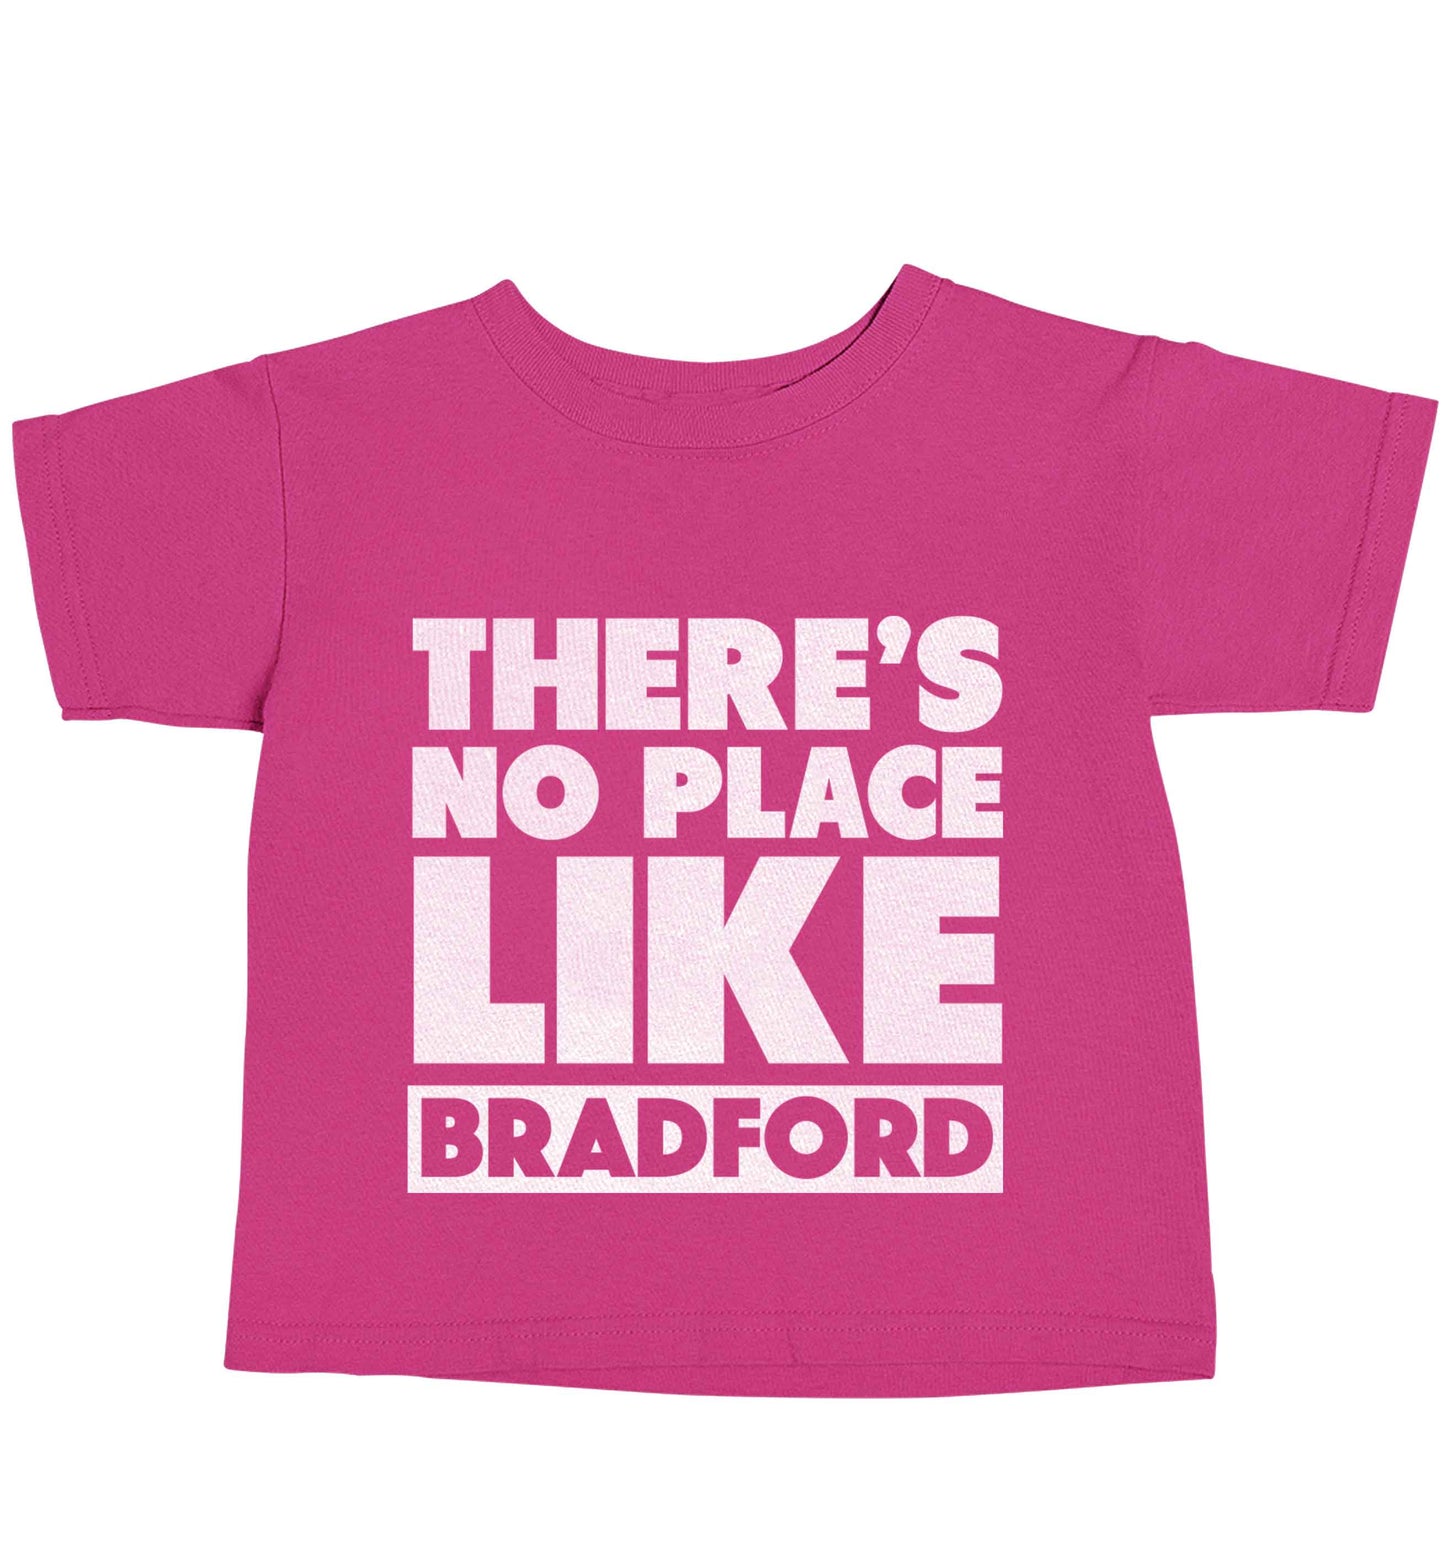 There's no place like Bradford pink baby toddler Tshirt 2 Years